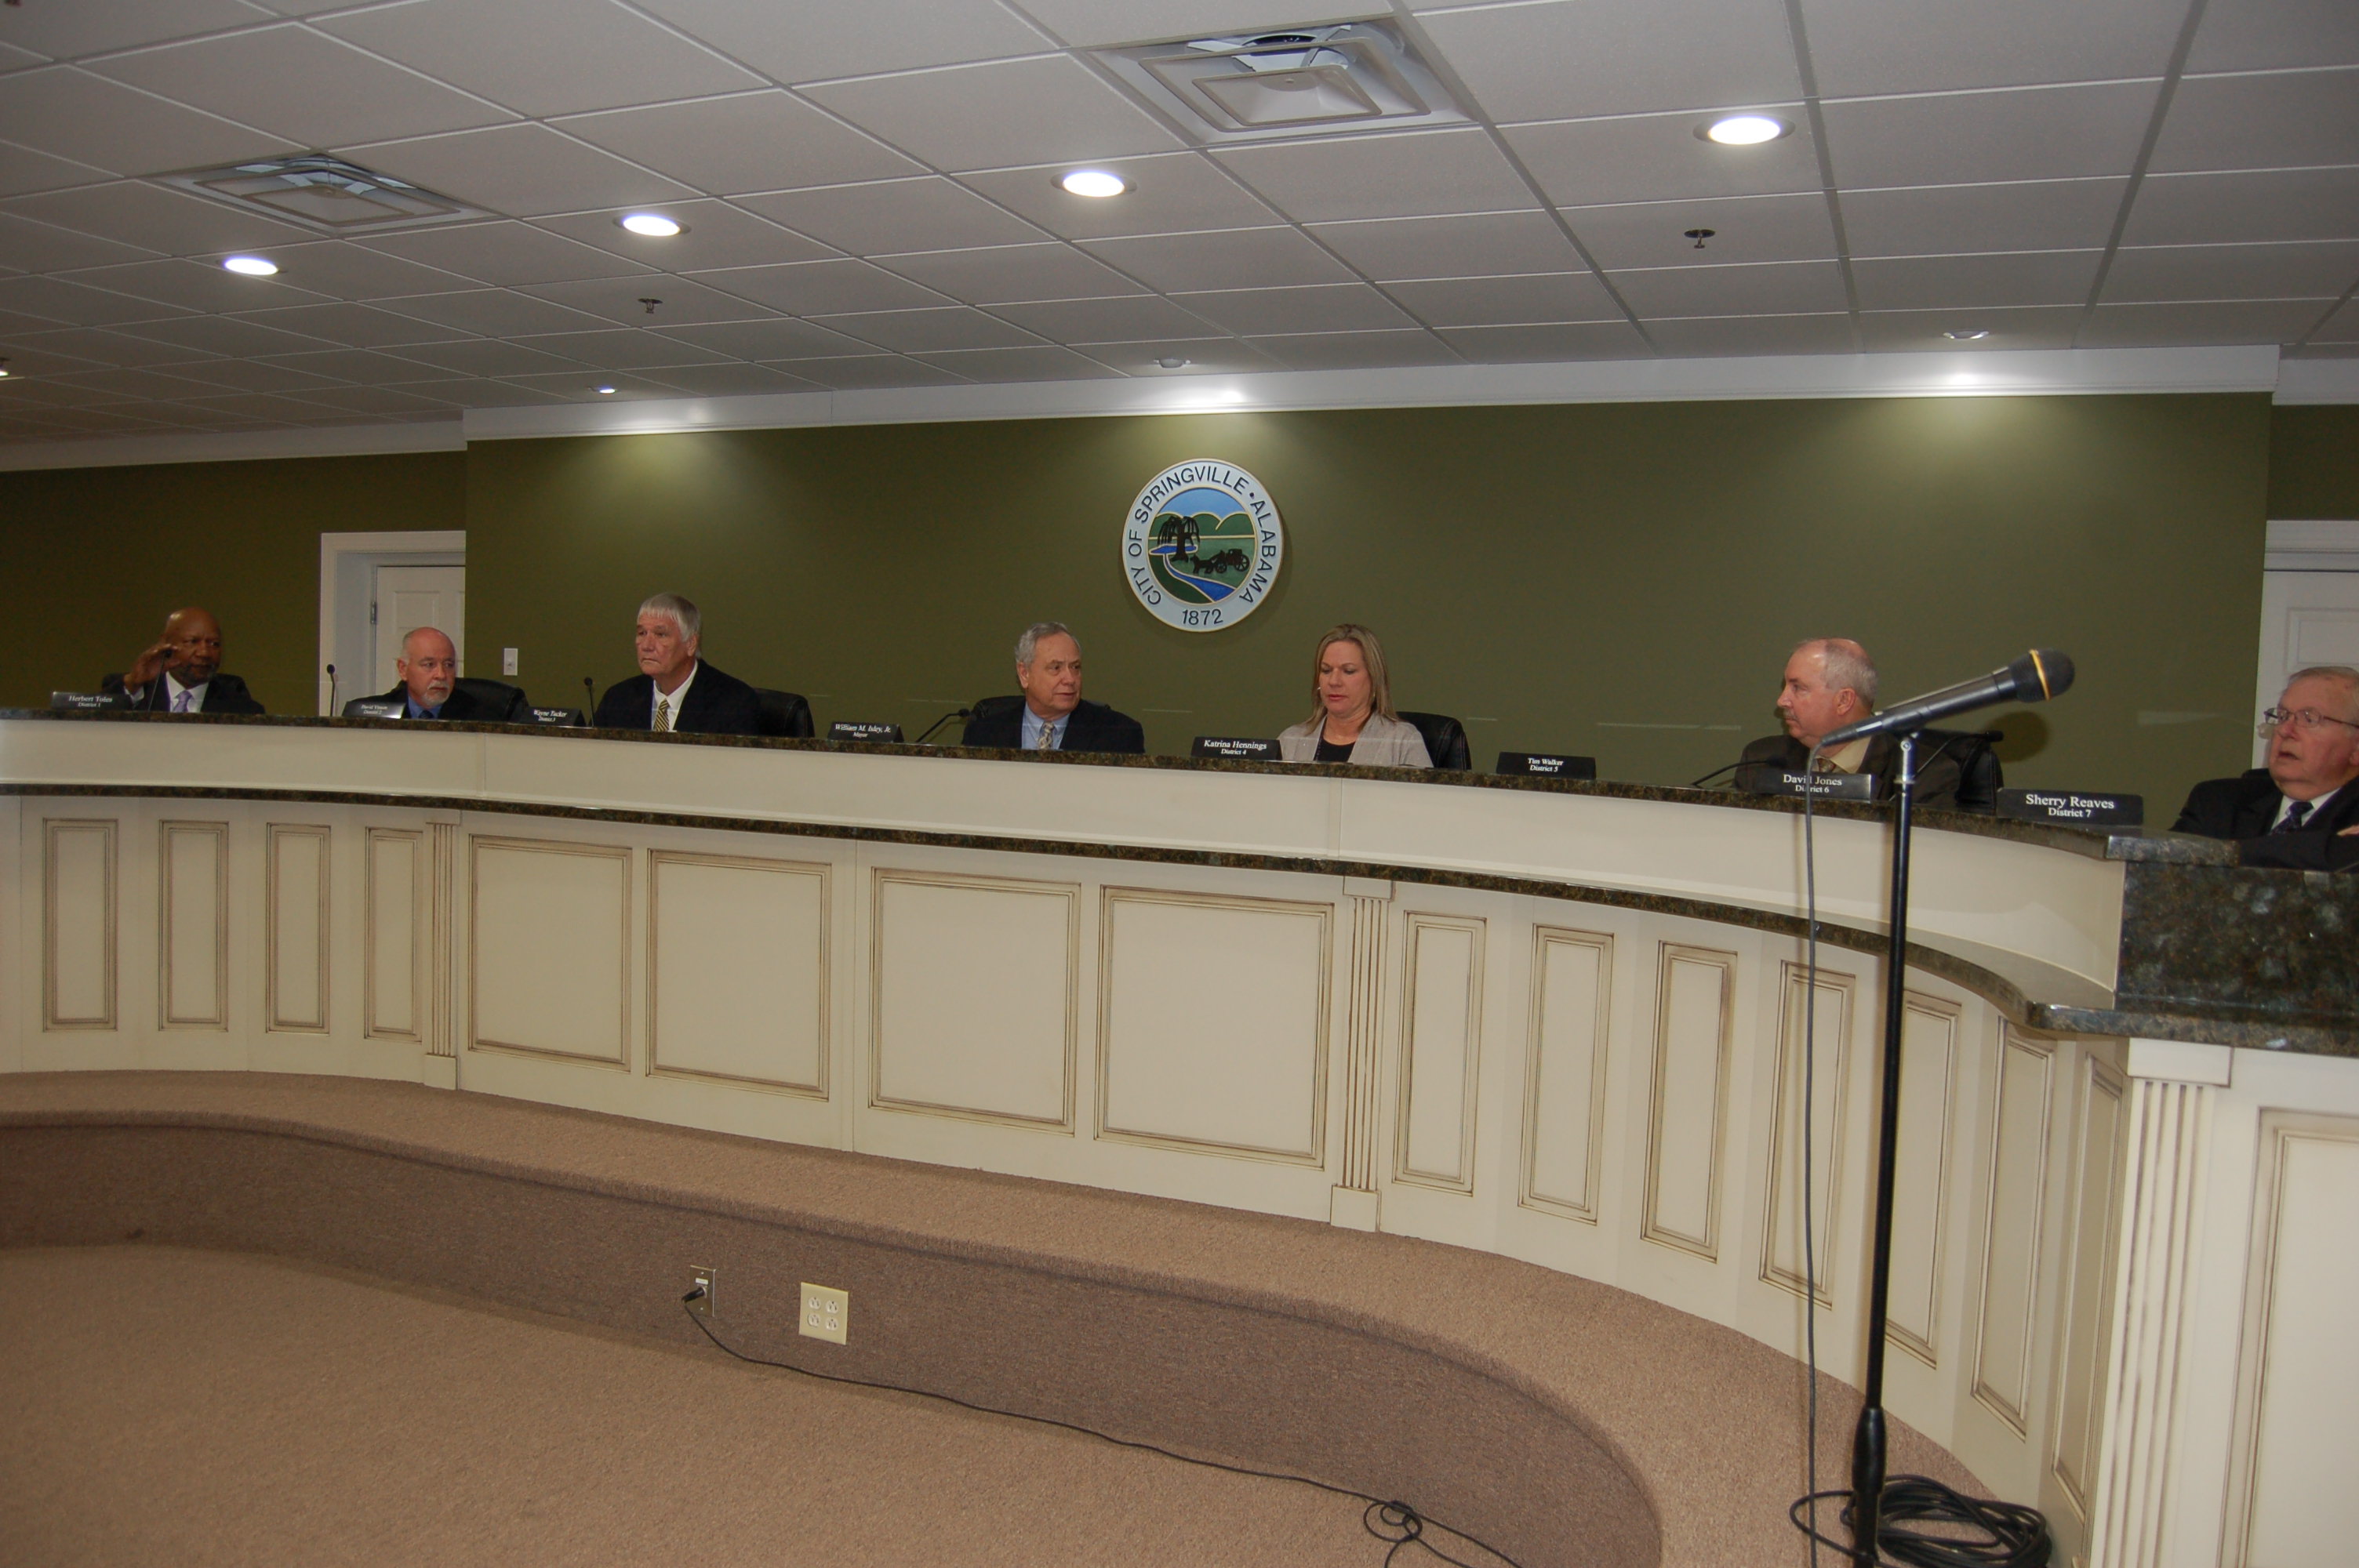 Springville City Council discusses library parking lot, flooding issues on private property